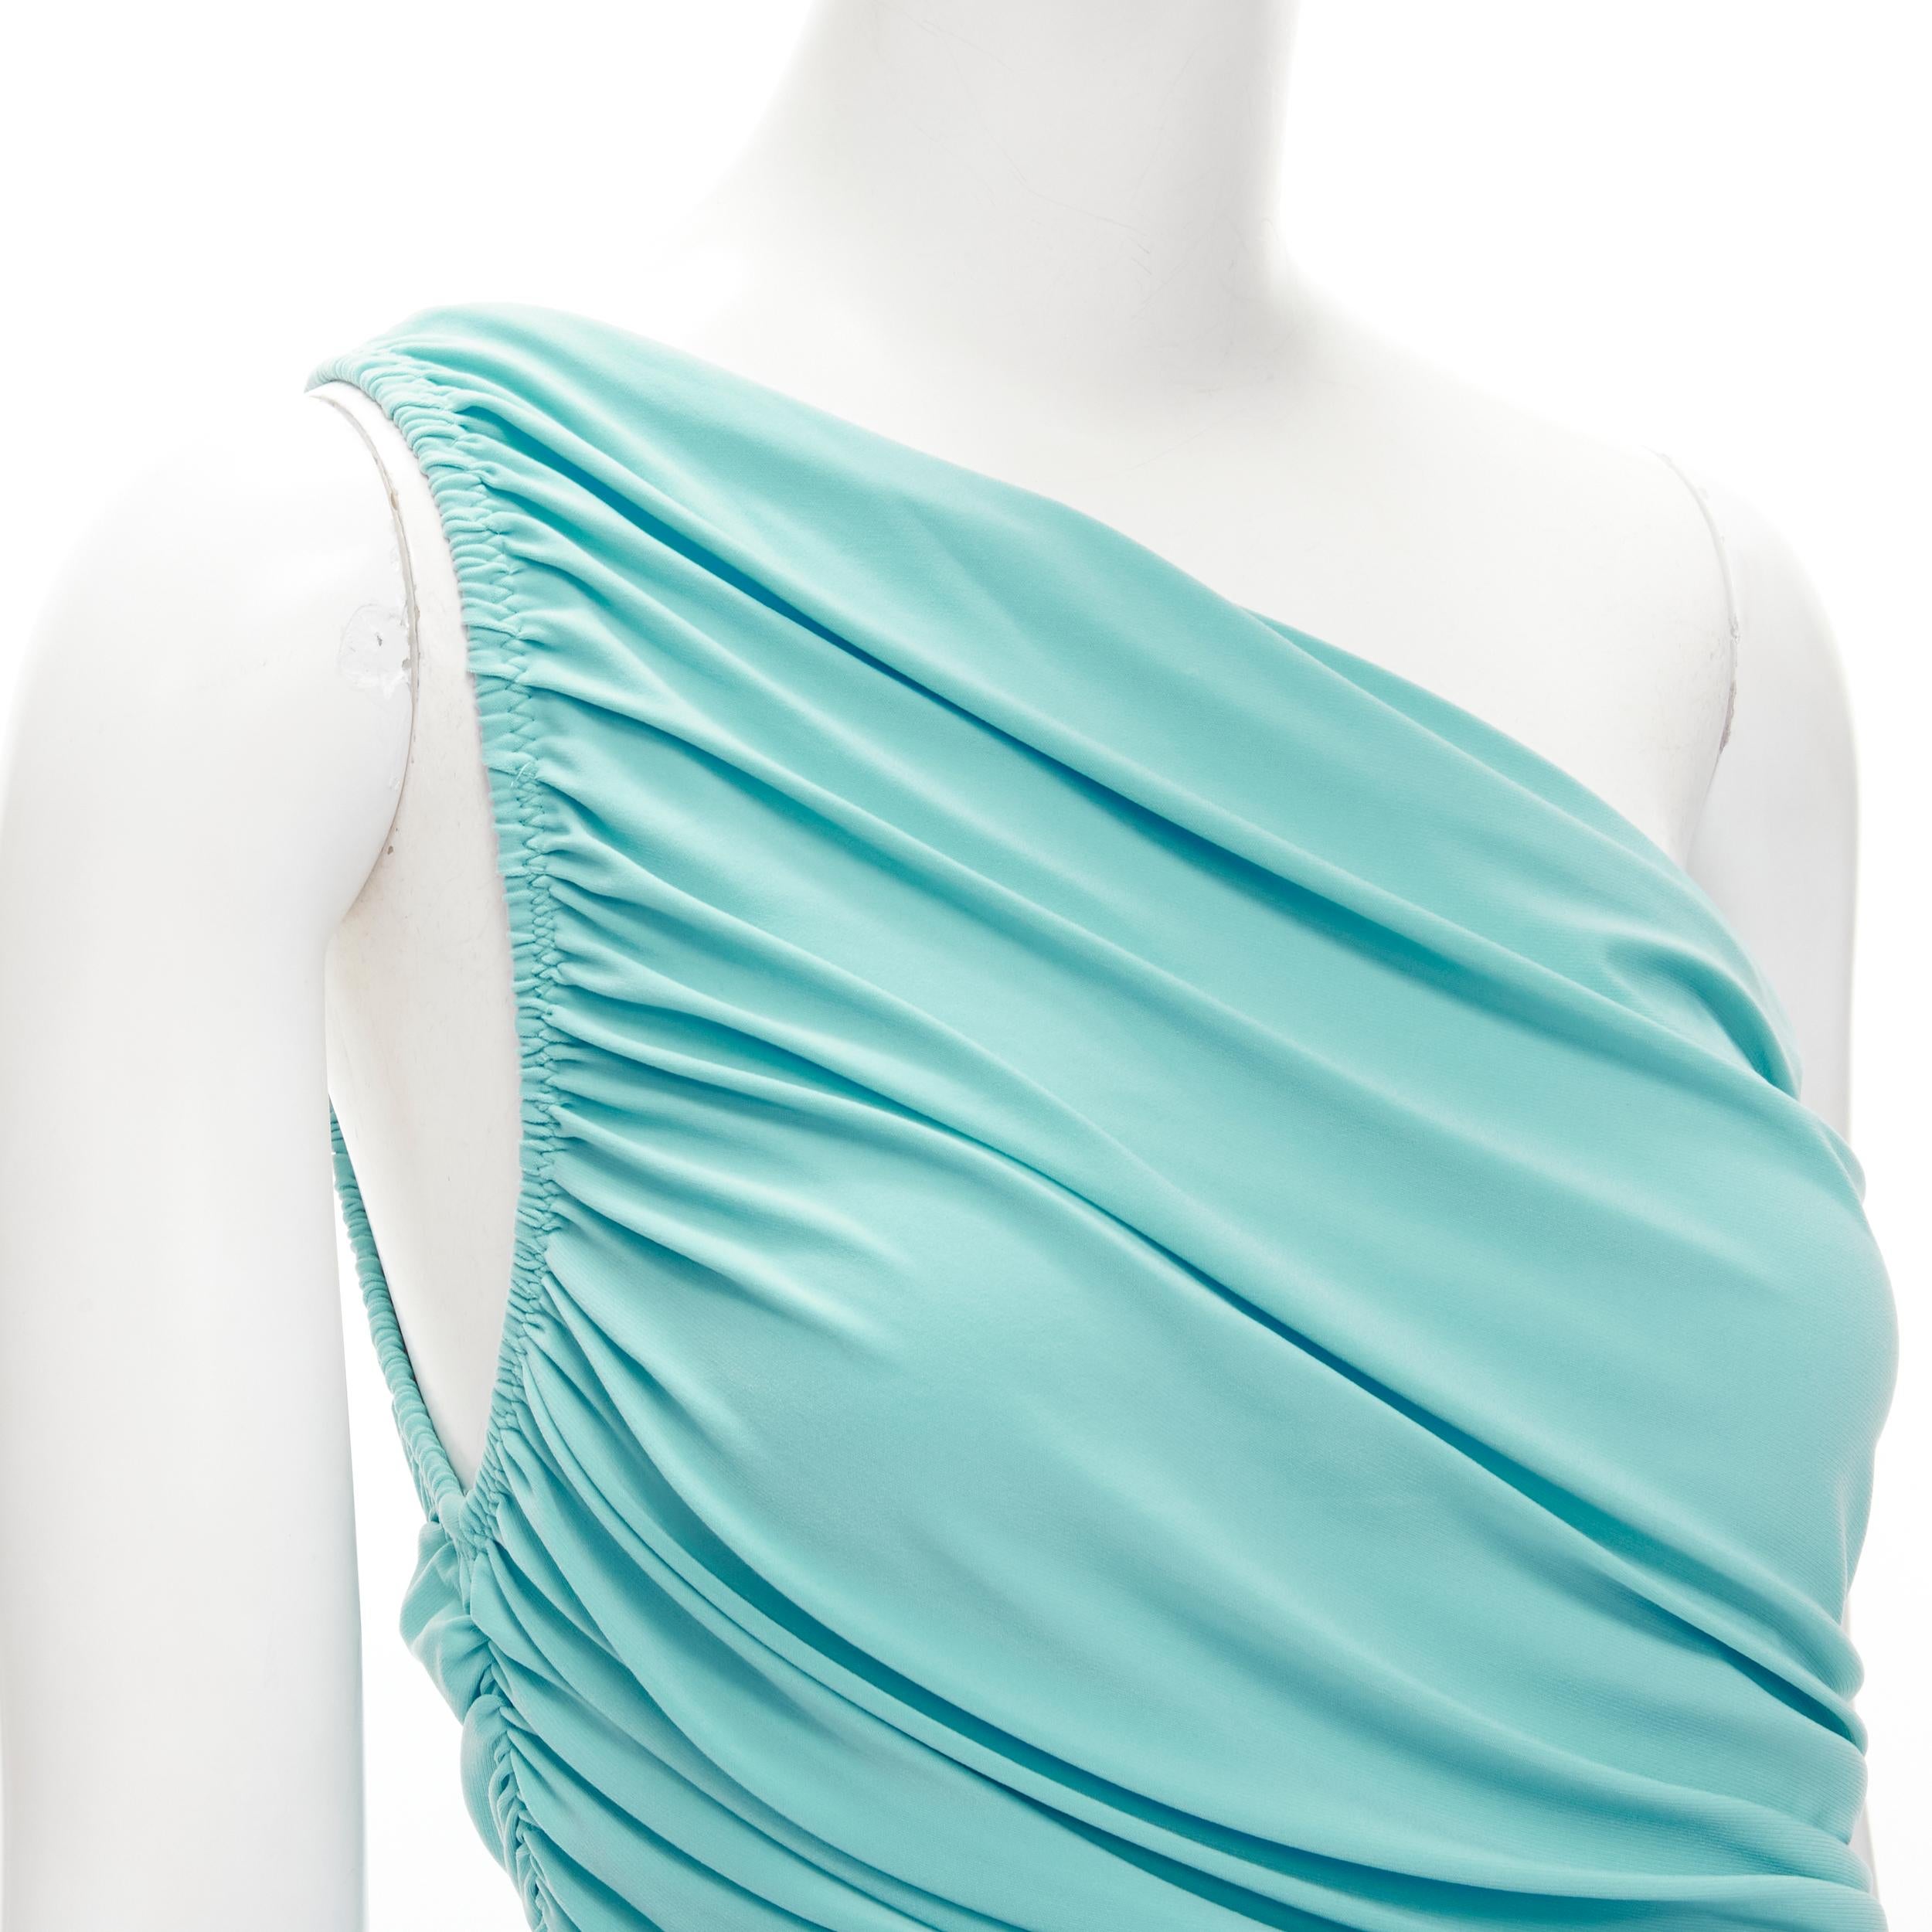 NORMA KAMALI Diana sky blue one shoulder ruched jersey bodycon dress XS 
Reference: LNKO/A02023 
Brand: Normal Kamali 
Material: Jersey 
Color: Blue 
Pattern: Solid 
Closure: Stretch 
Made in: China 

CONDITION: 
Condition: Excellent, this item was